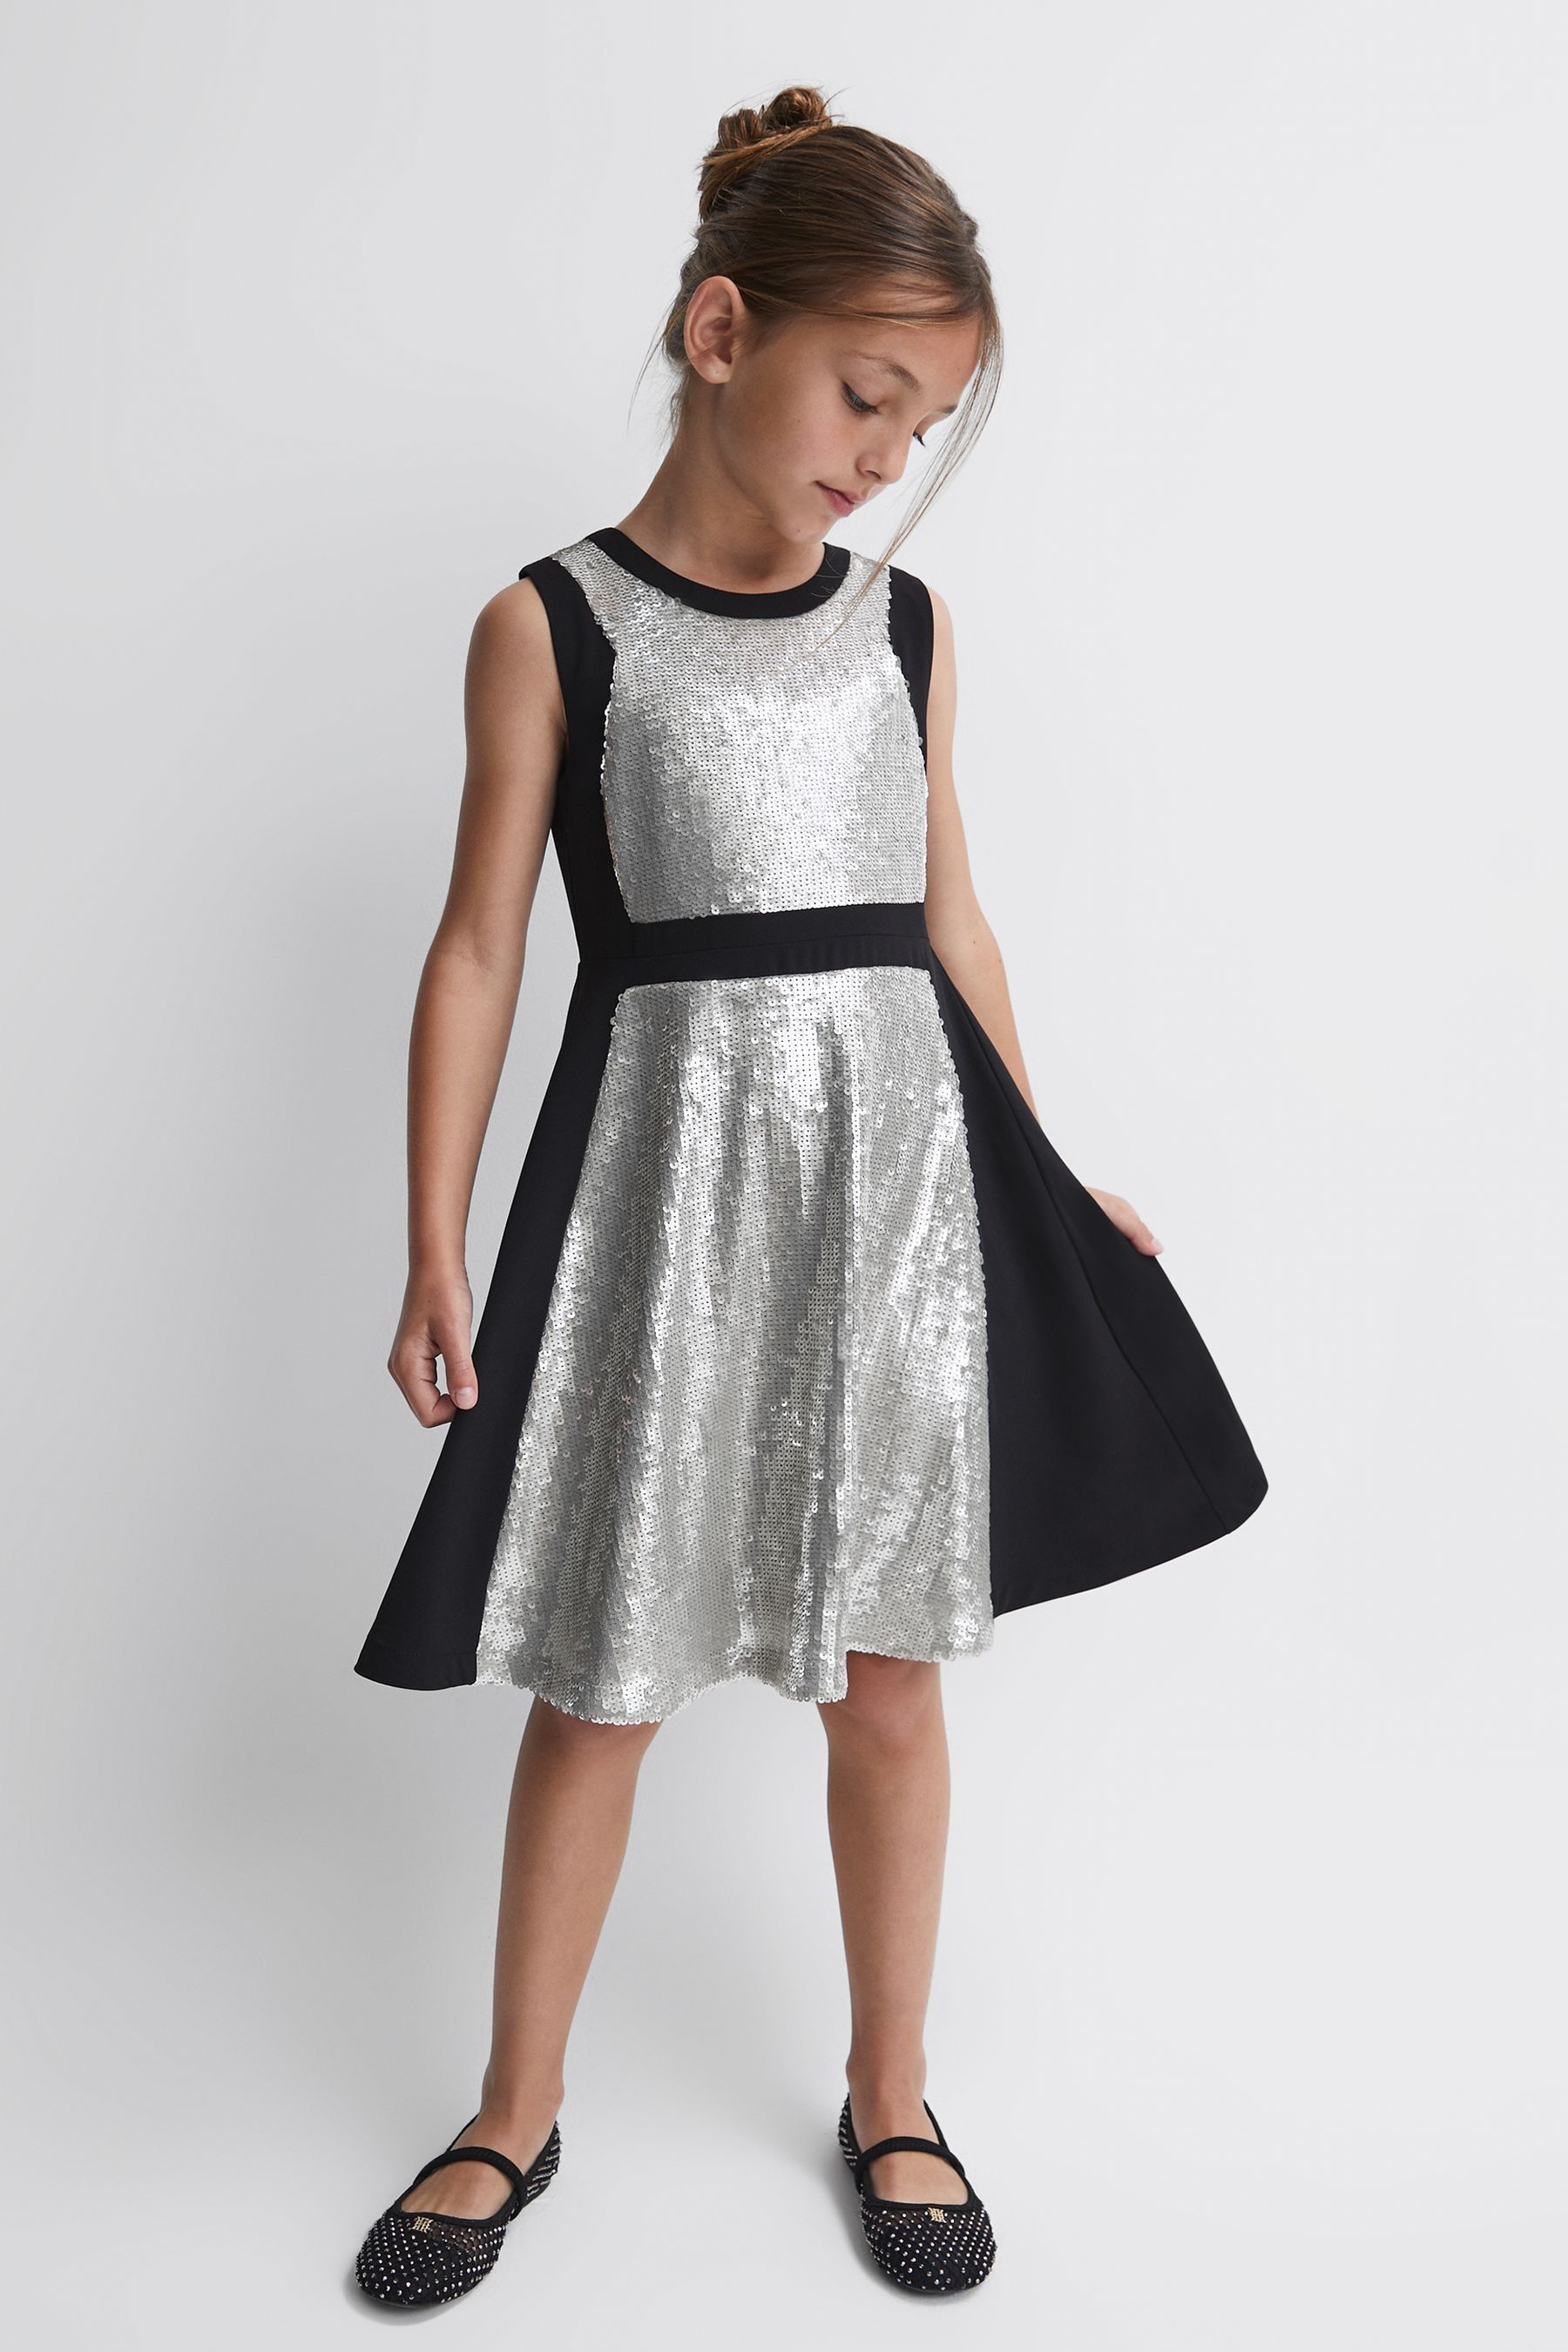 Reiss Kids' Libra - Black Junior Relaxed Fit Sequin Dress, Age 4-5 Years